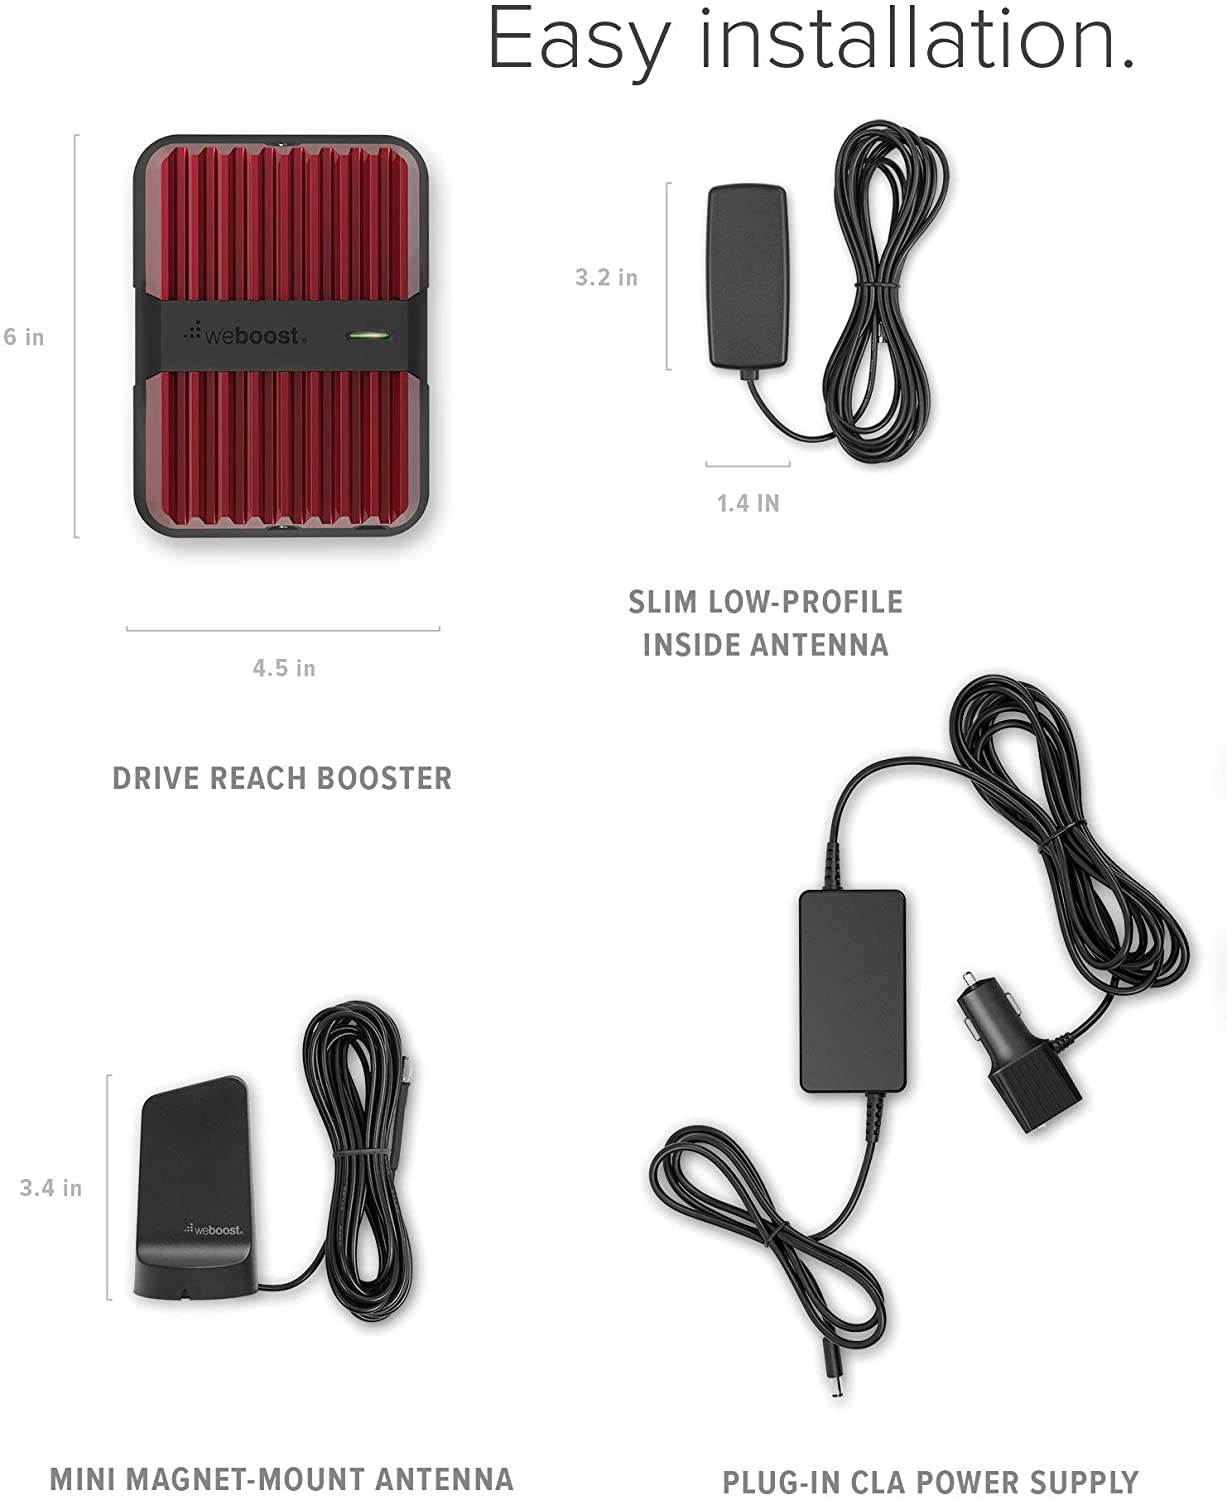 weBoost Drive Reach (650154) Cell Signal Booster for Your Car, Truck, Van, or SUV | Bell, Rogers, Telus - Enhance Your Cell Phone Signal